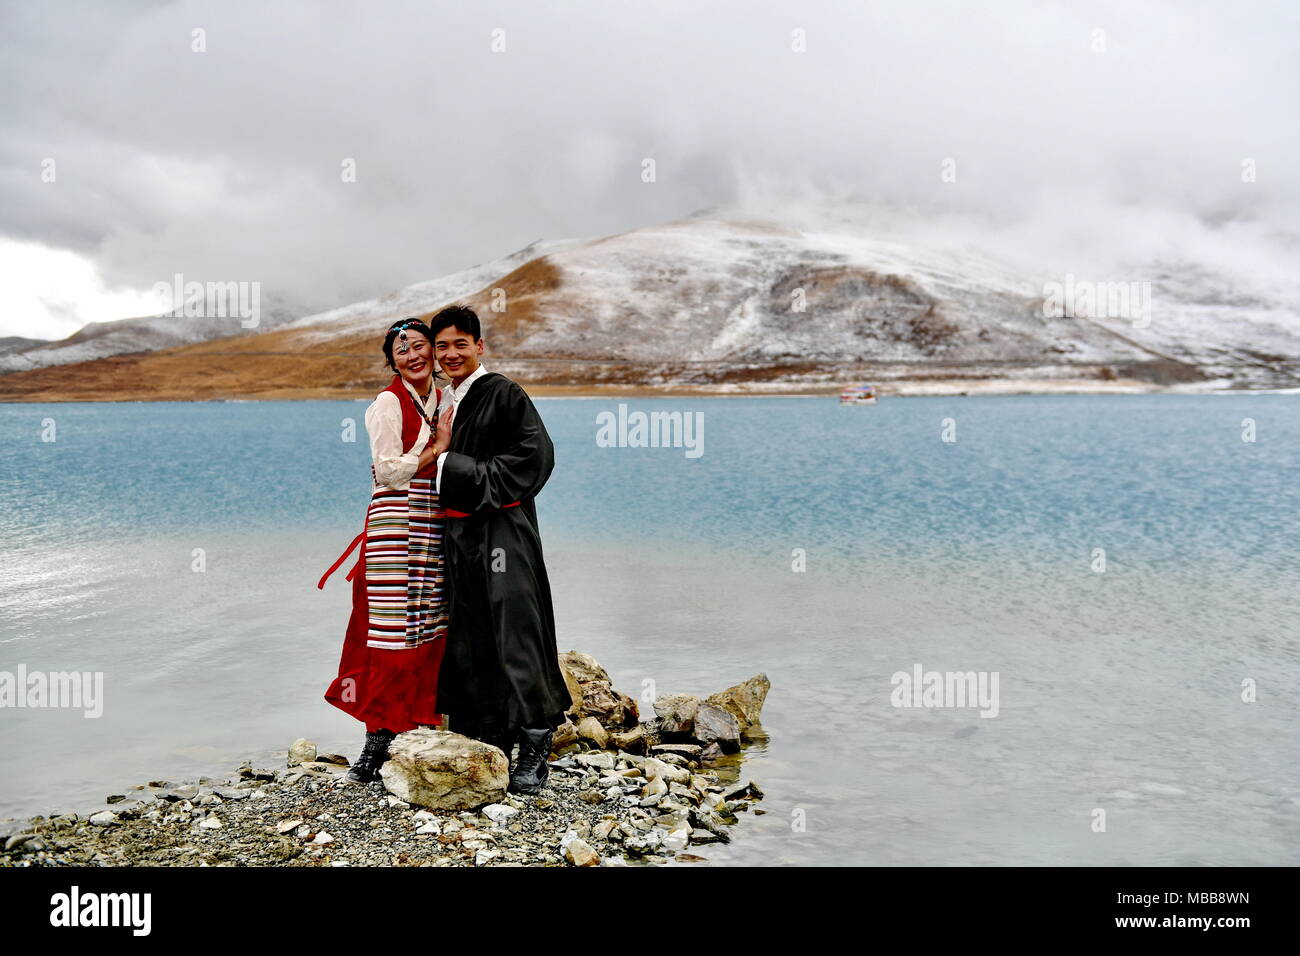 Lhasa, China's Tibet Autonomous Region. 8th Apr, 2018. Tourists pose for photos by the Yamdrok Lake in Nagarze County of Shannan City, southwest China's Tibet Autonomous Region, April 8, 2018. The Yamdrok Lake, about 100 kilometers south of the region's capital Lhasa, is one of the three holy lakes in the region. Credit: Zhang Rufeng/Xinhua/Alamy Live News Stock Photo